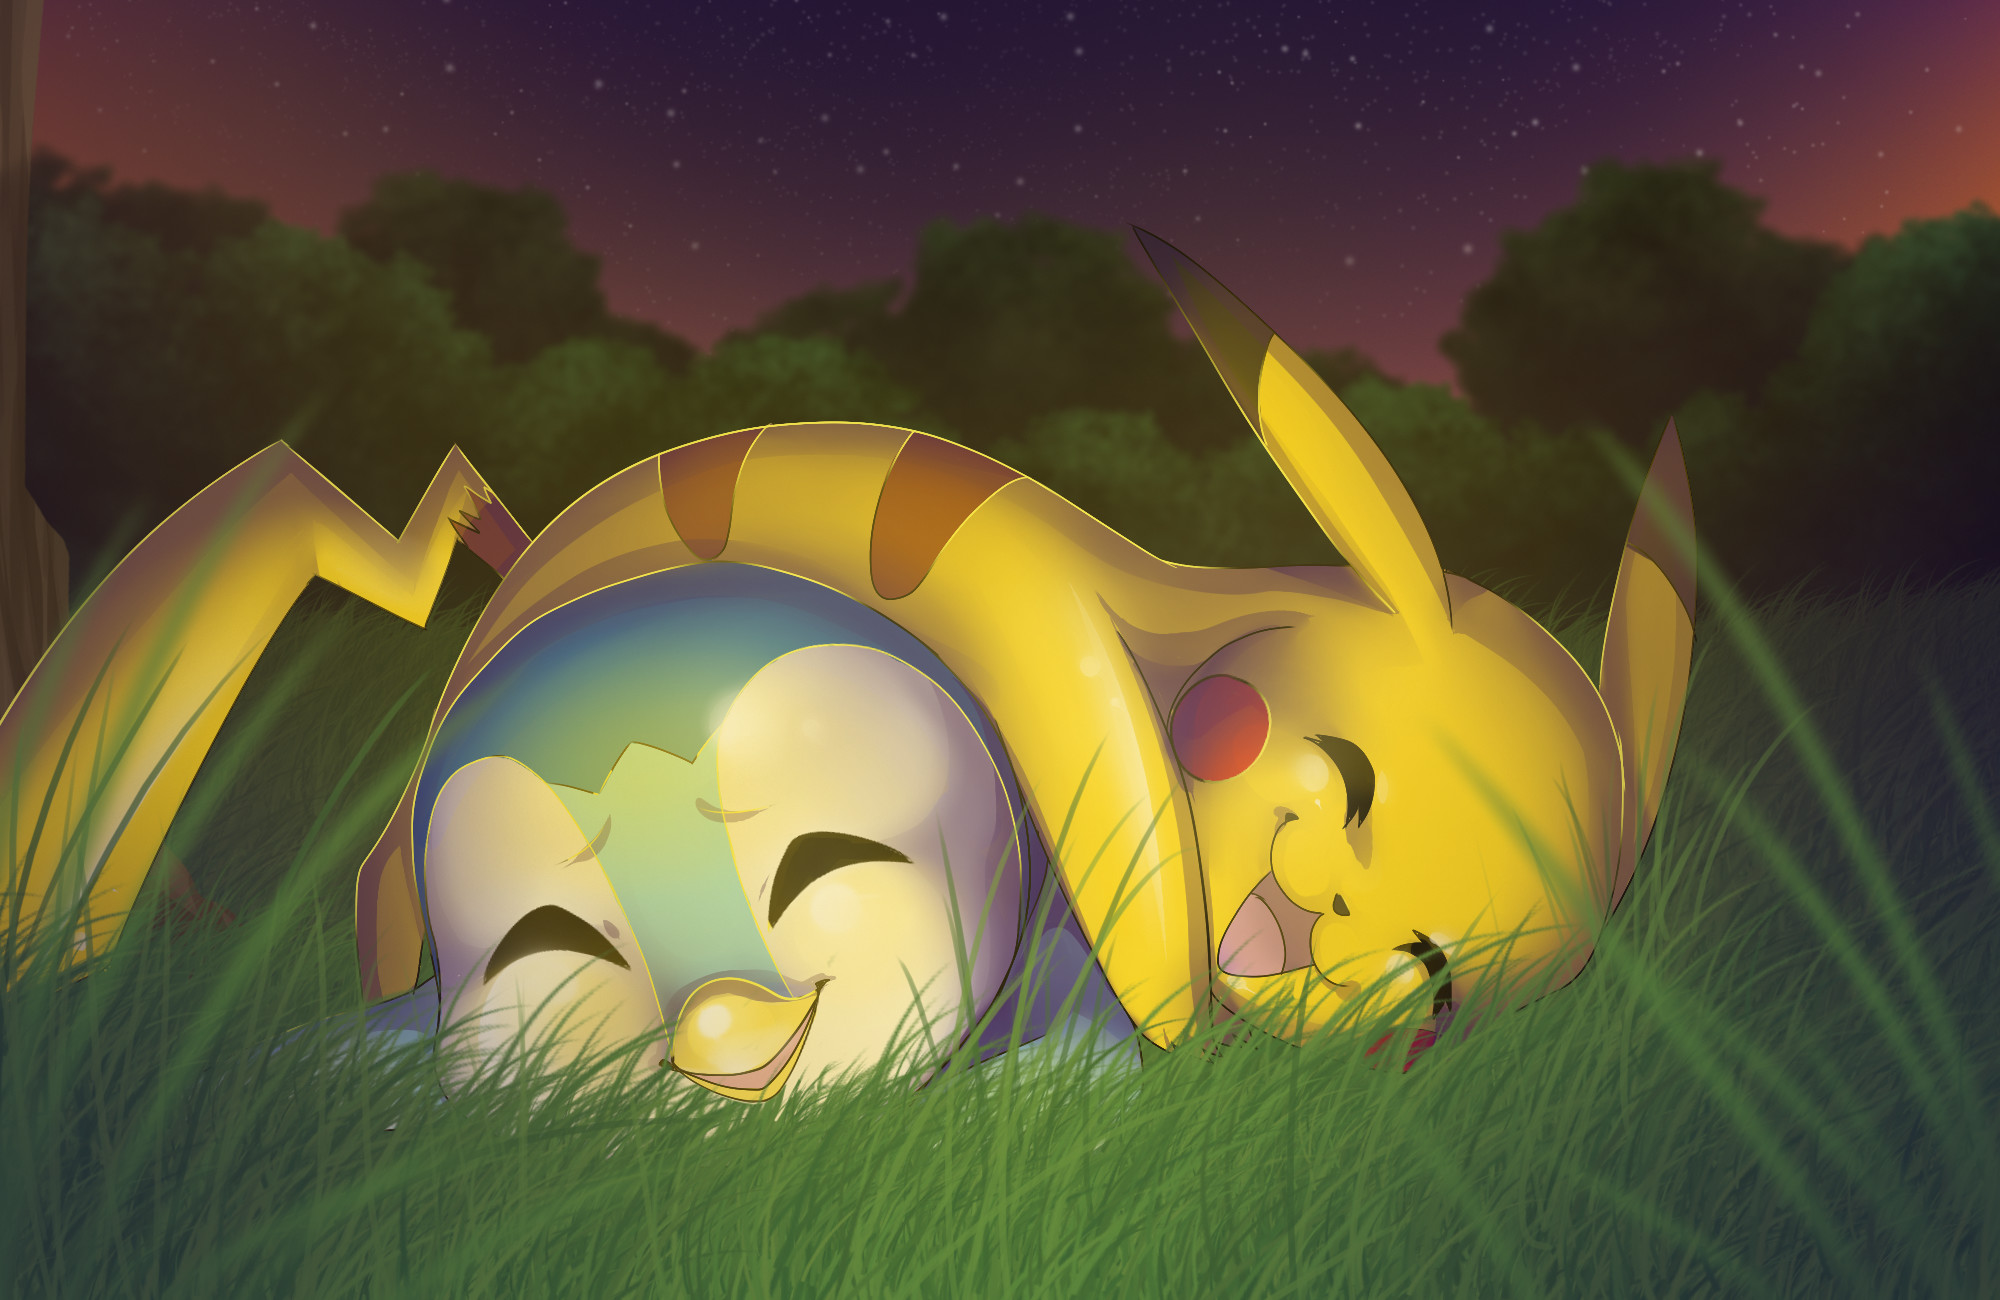 Cute Pokemon Wallpapers 73 images 